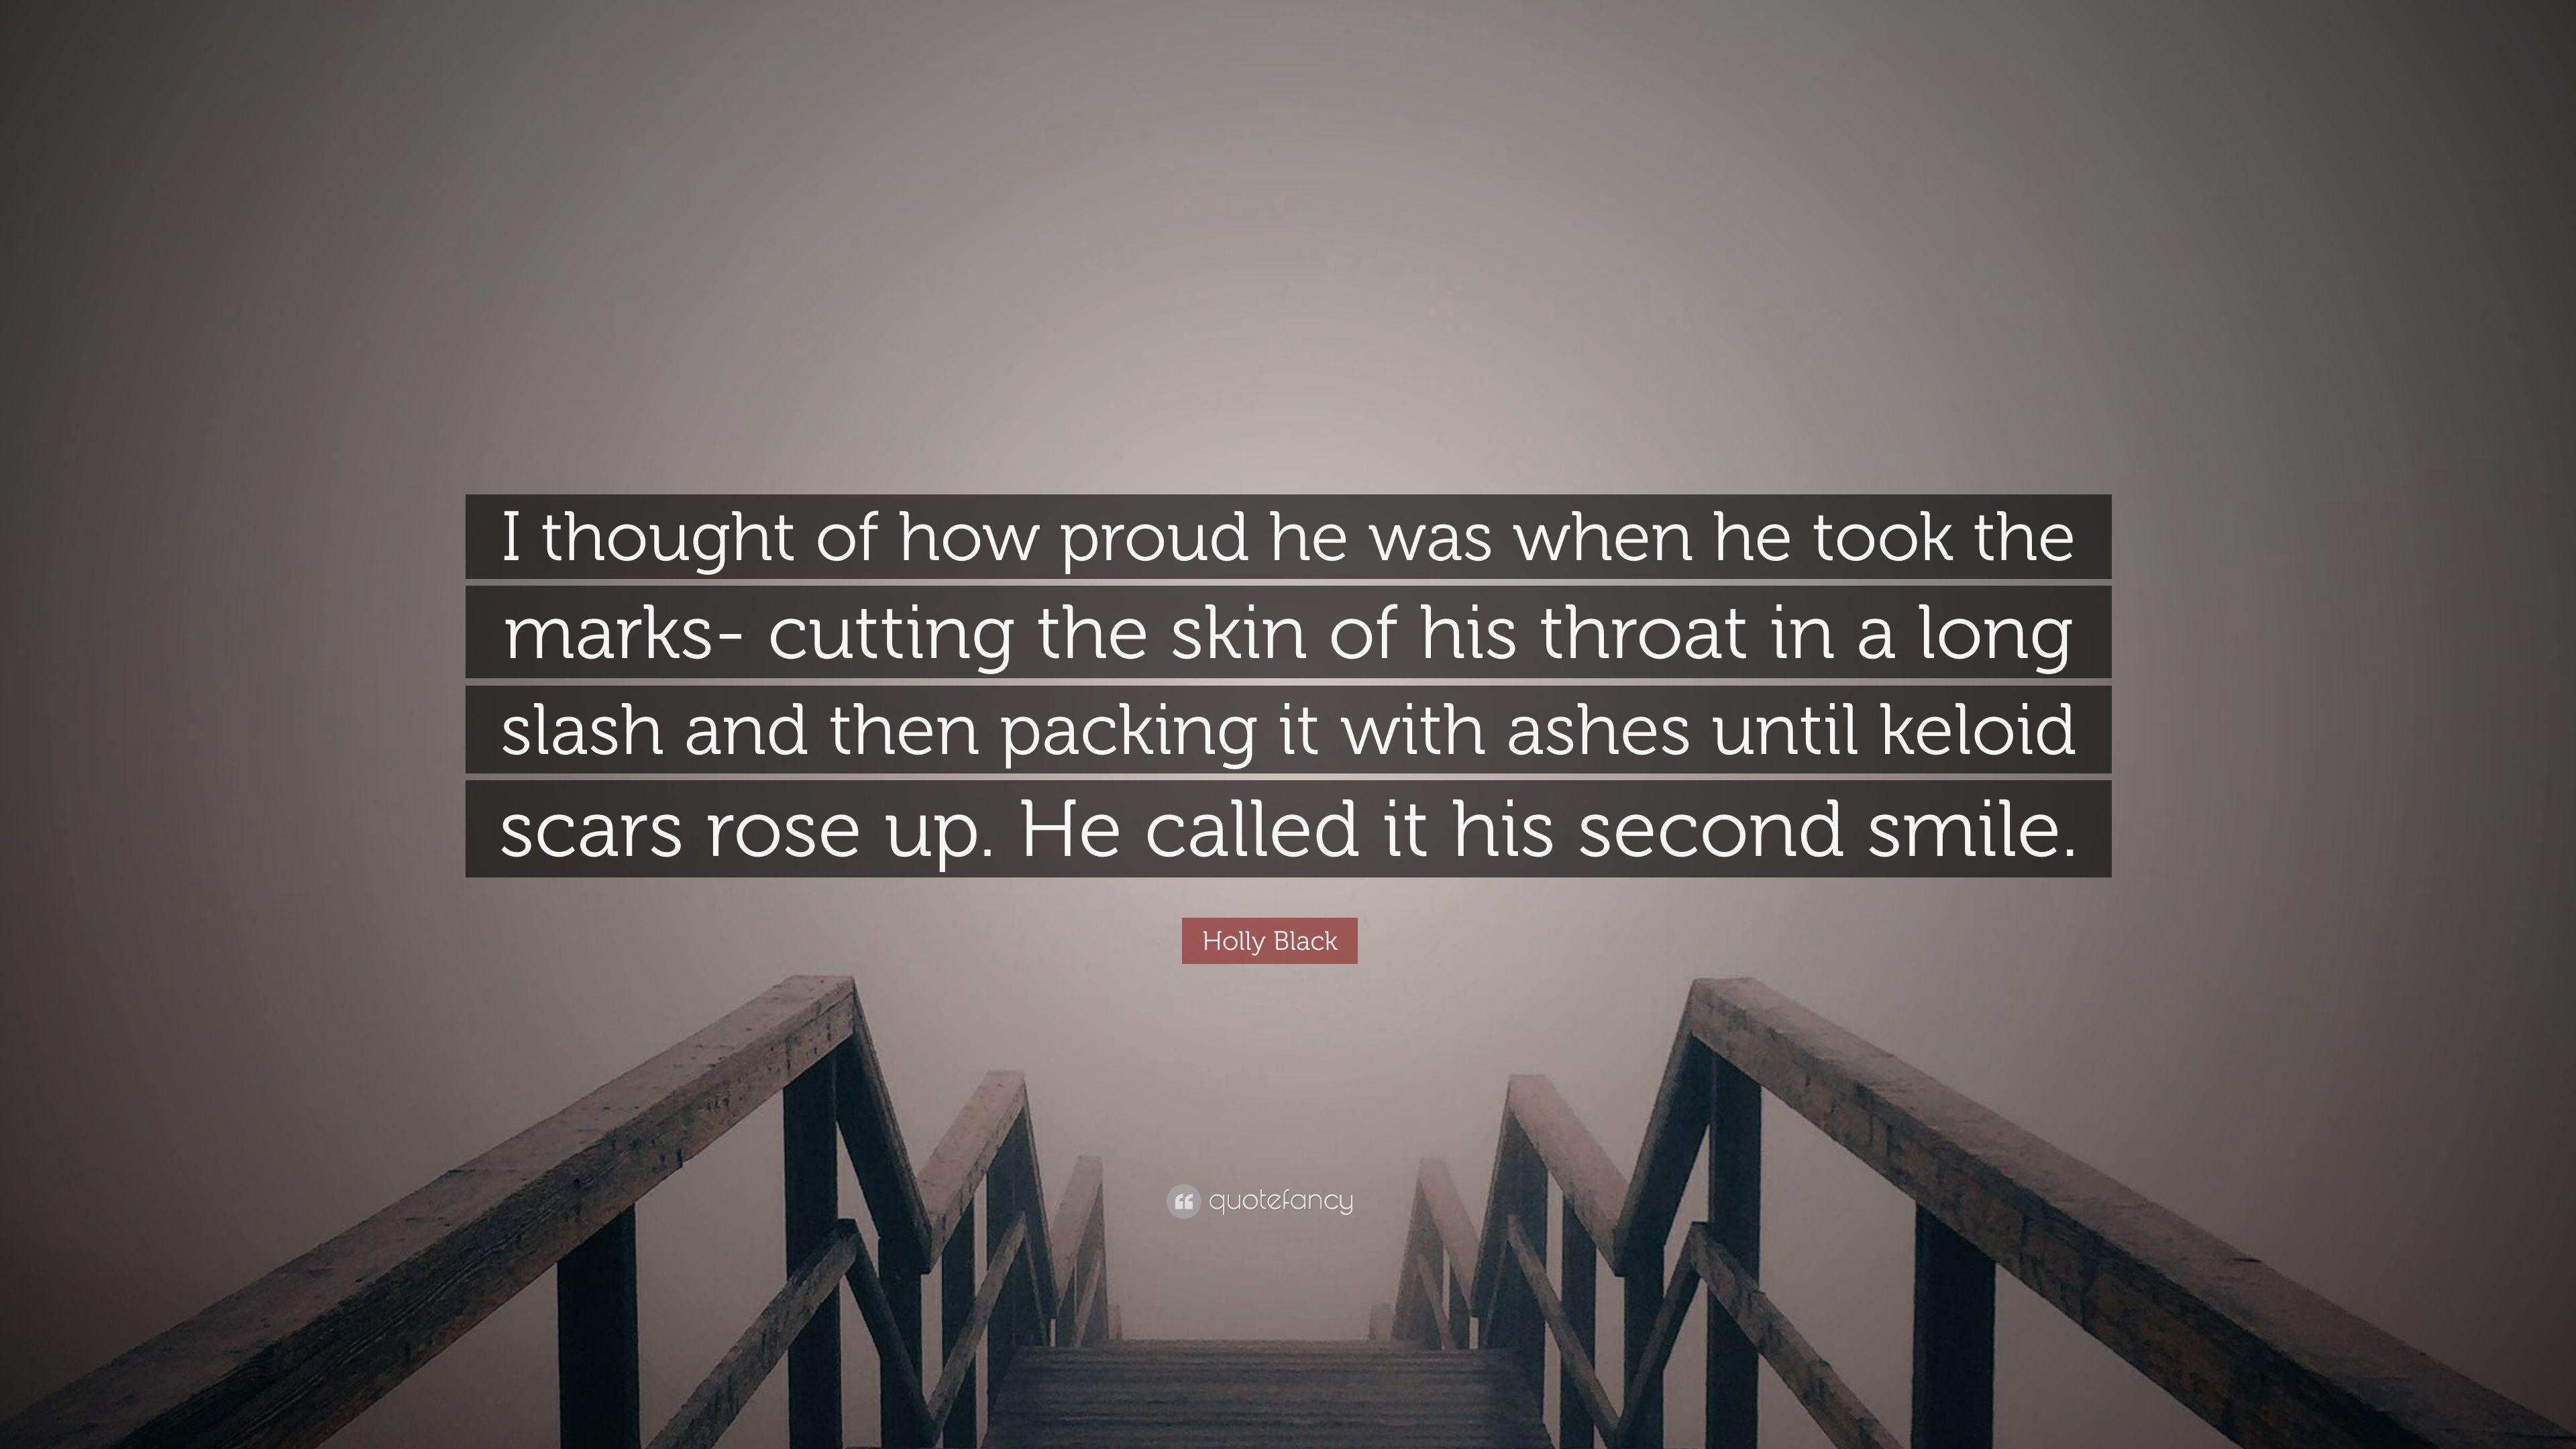 Holly Black Quote: “I thought of how proud he was when he took